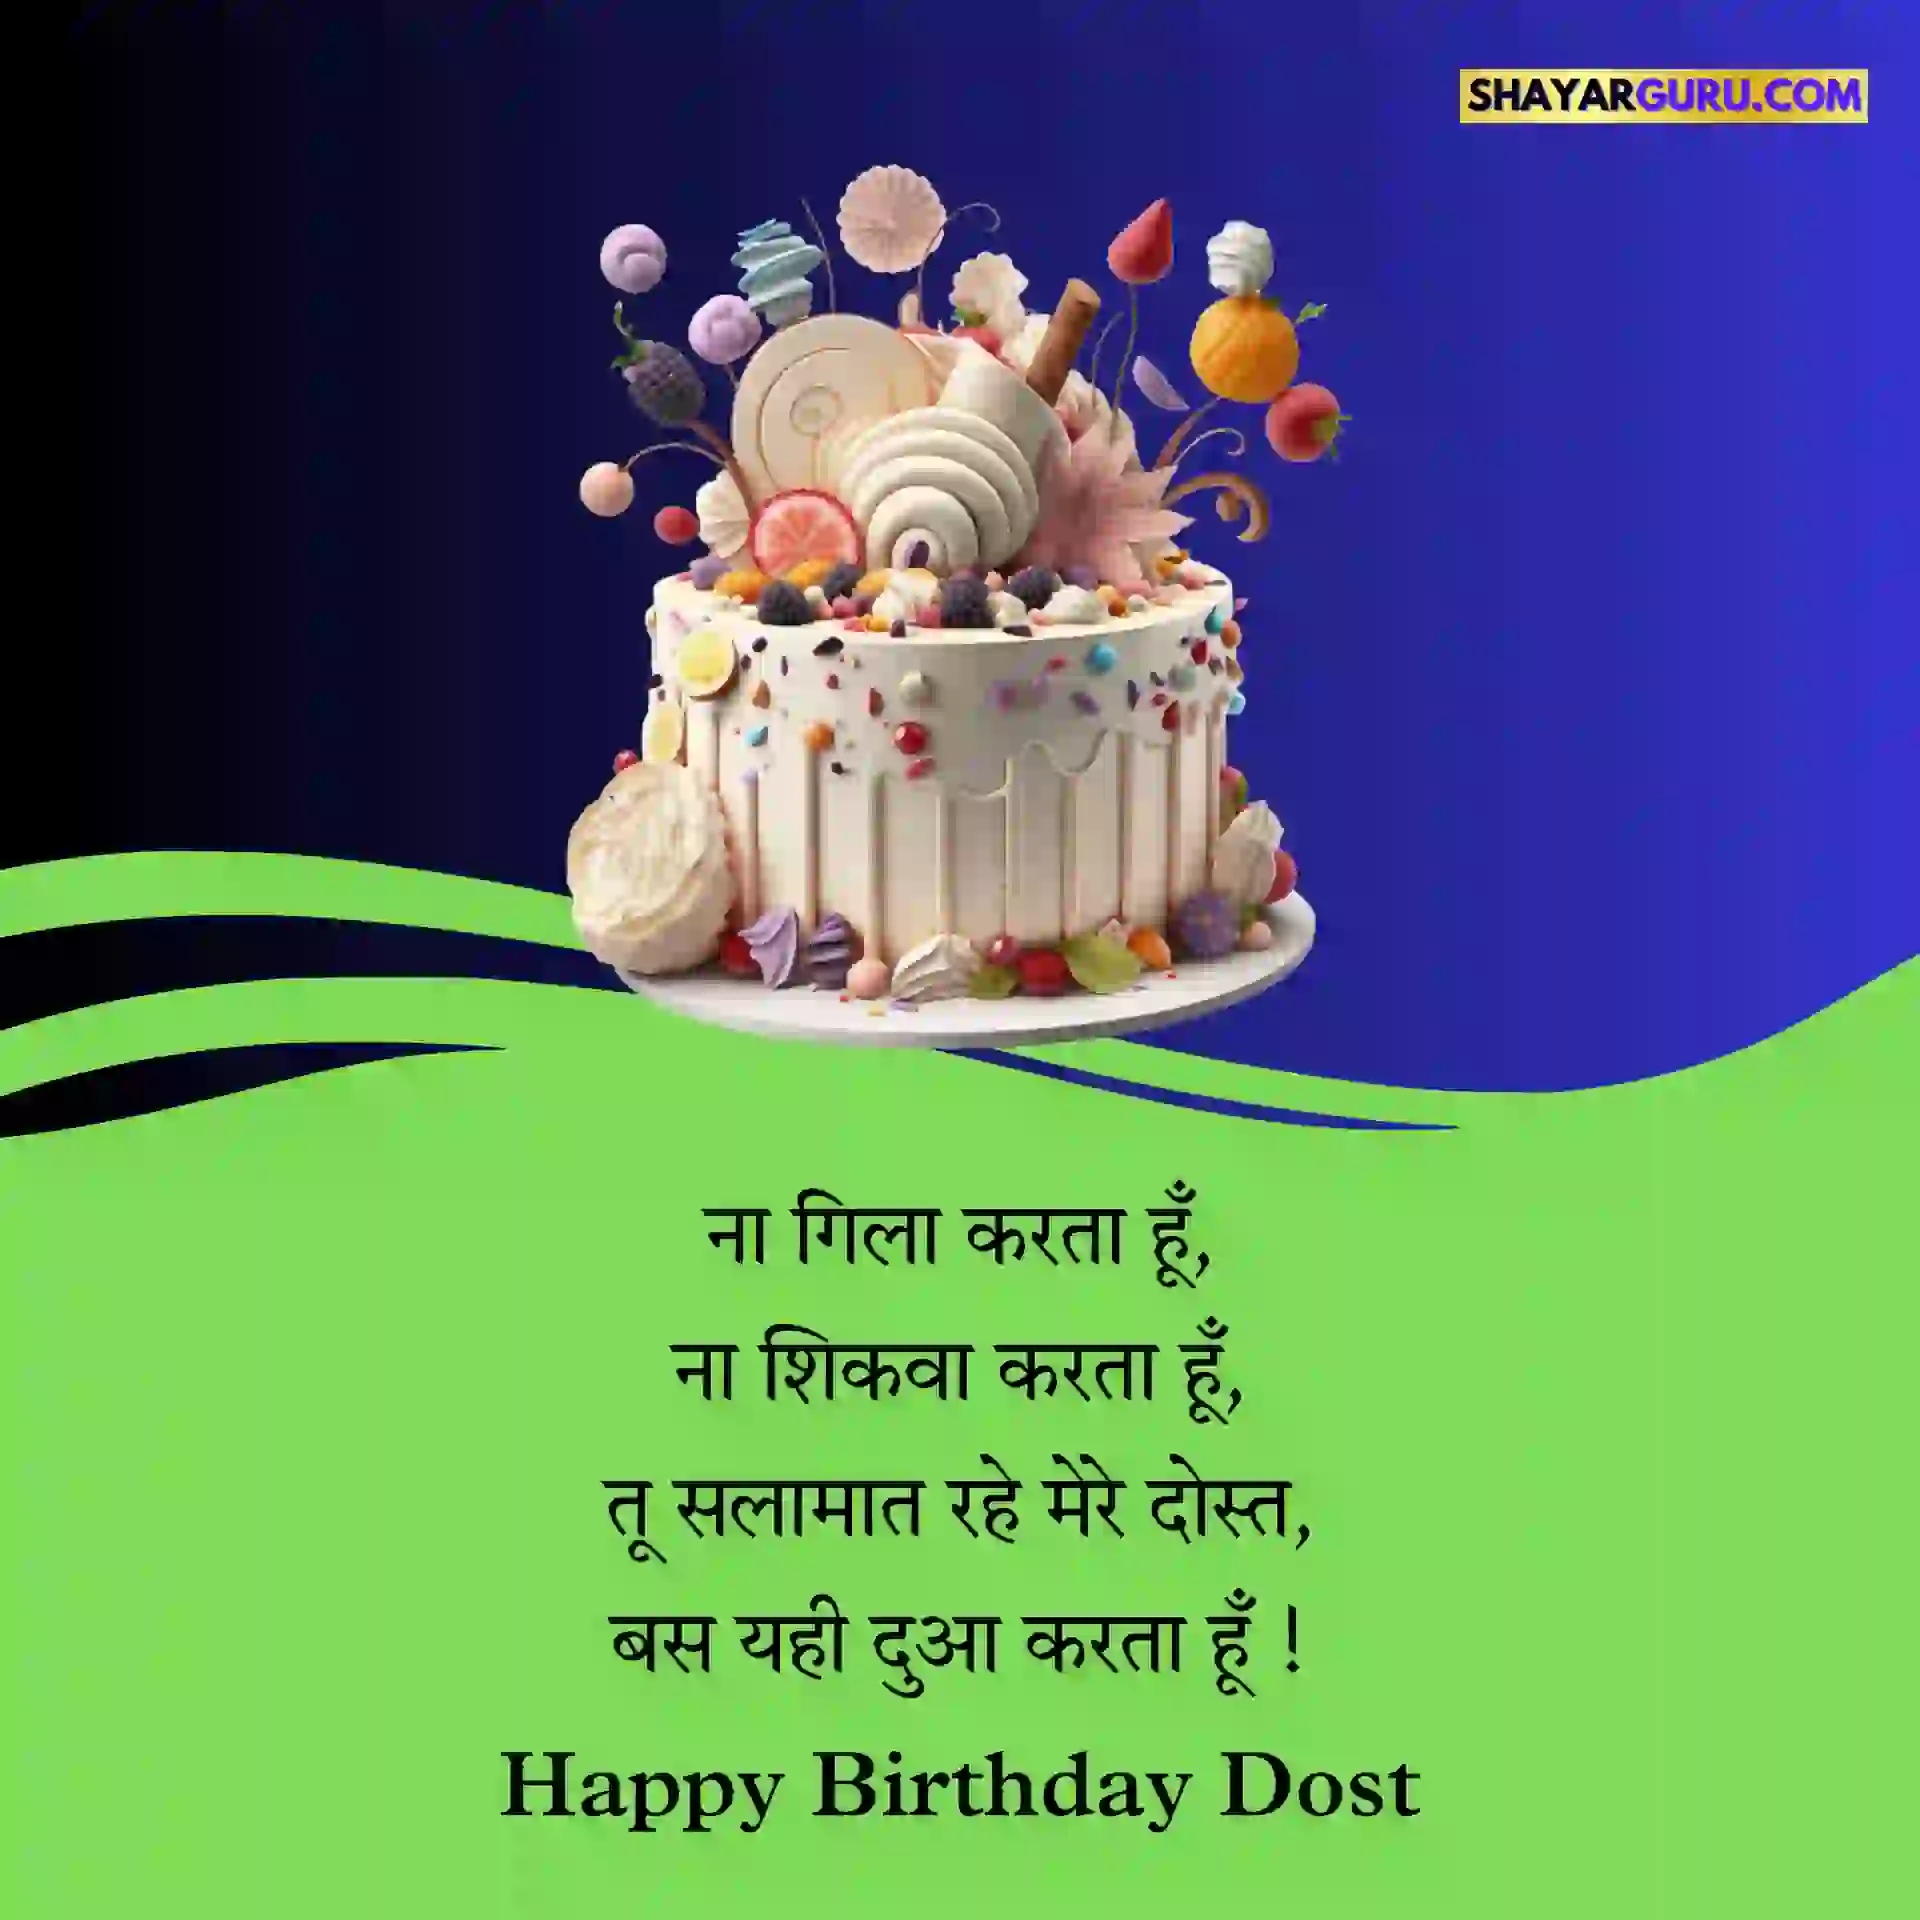 Birthday Wishes for Friend in Hindi HD Image